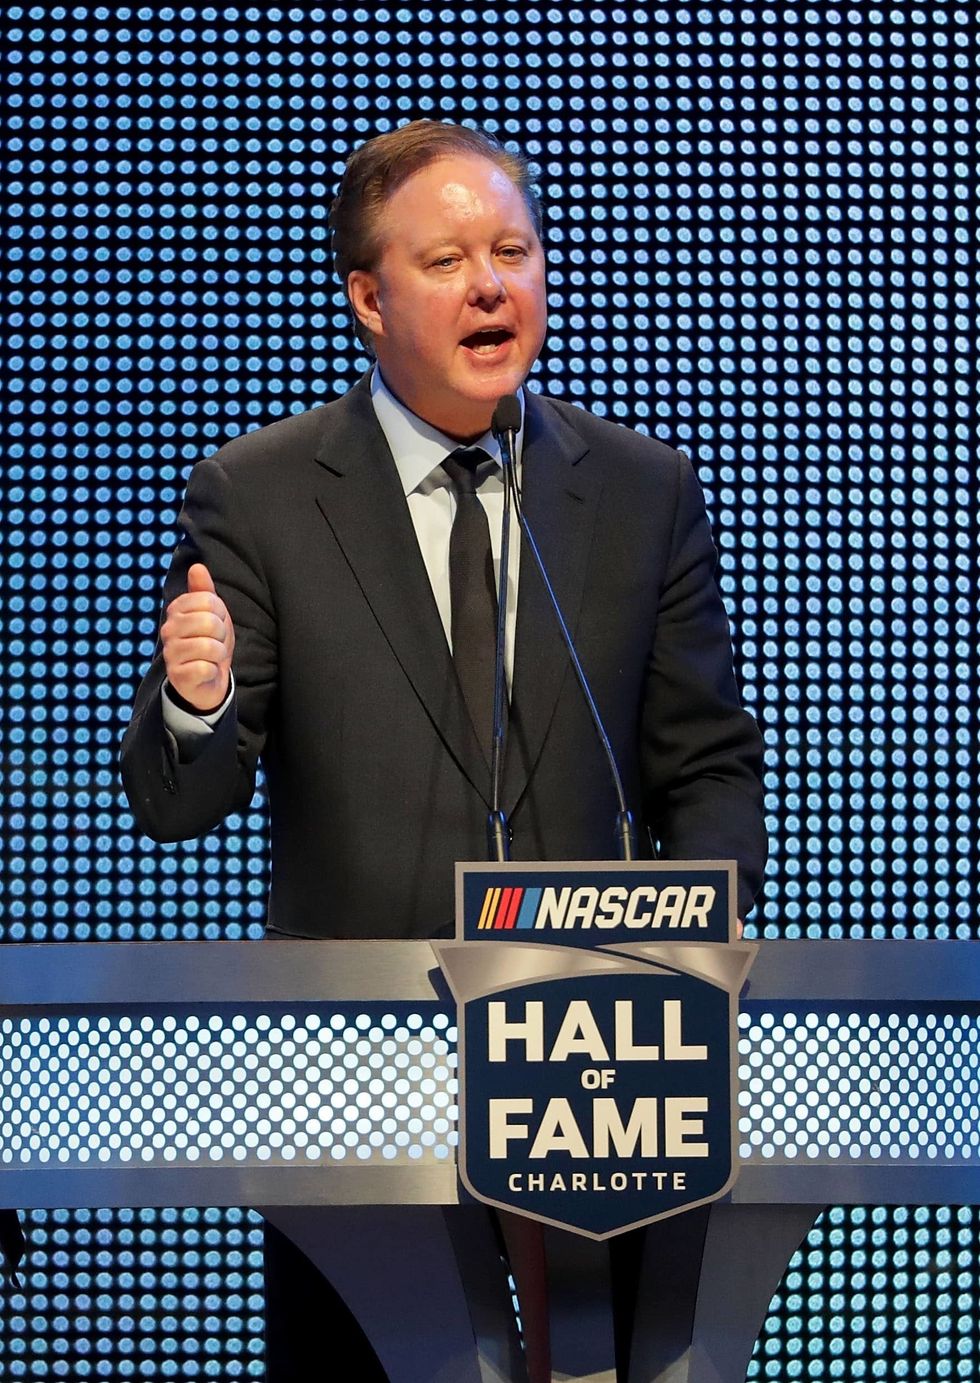 The potential demise of Brian France and what’s next for NASCAR